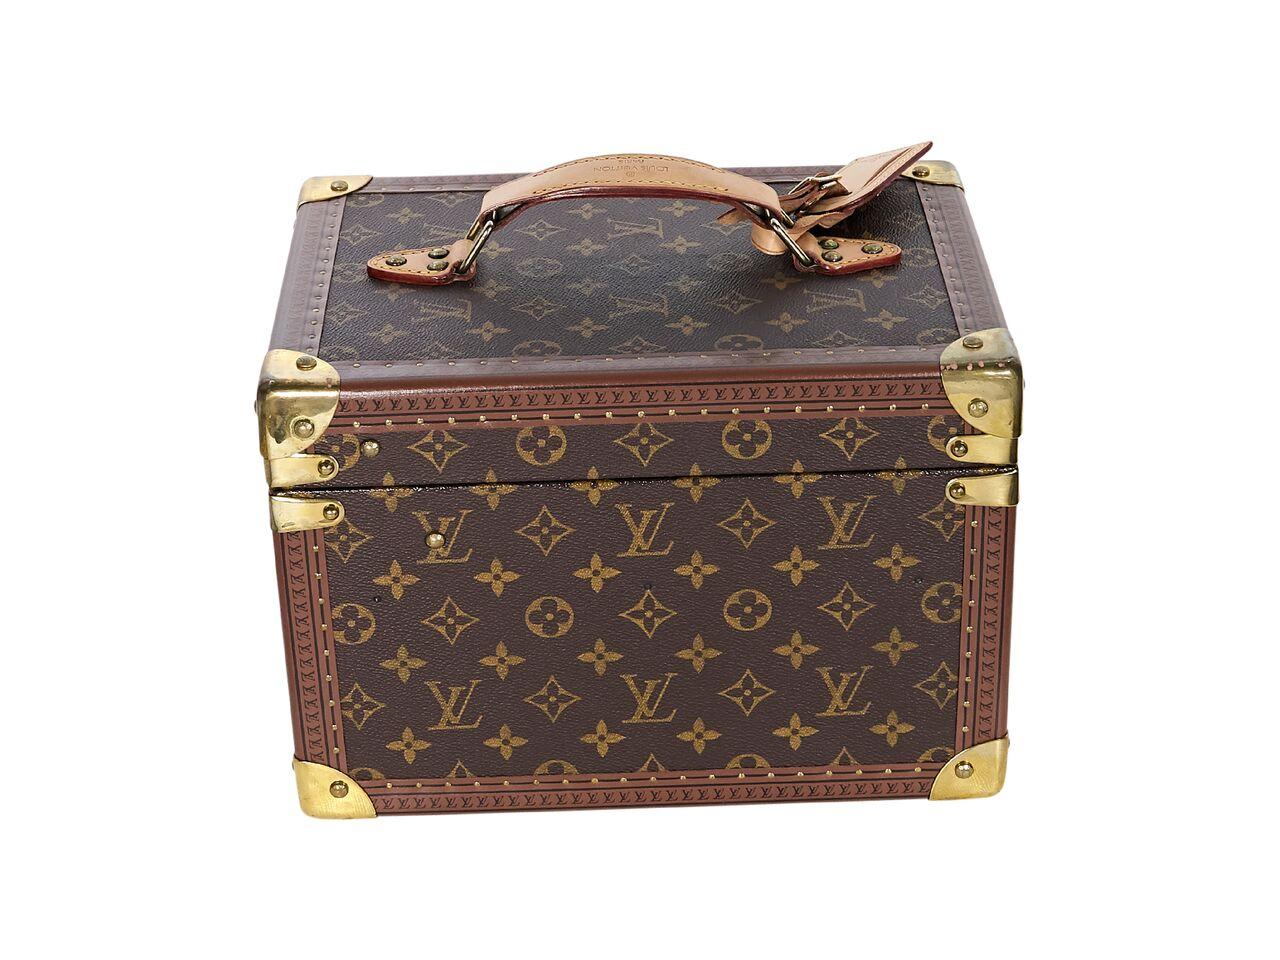 Product details:  Brown monogram coated canvas train case trunk by Louis Vuitton.  Top carry handle.  Side push-lock closure.  Lined interior with removable case.  Goldtone hardware.  8.5